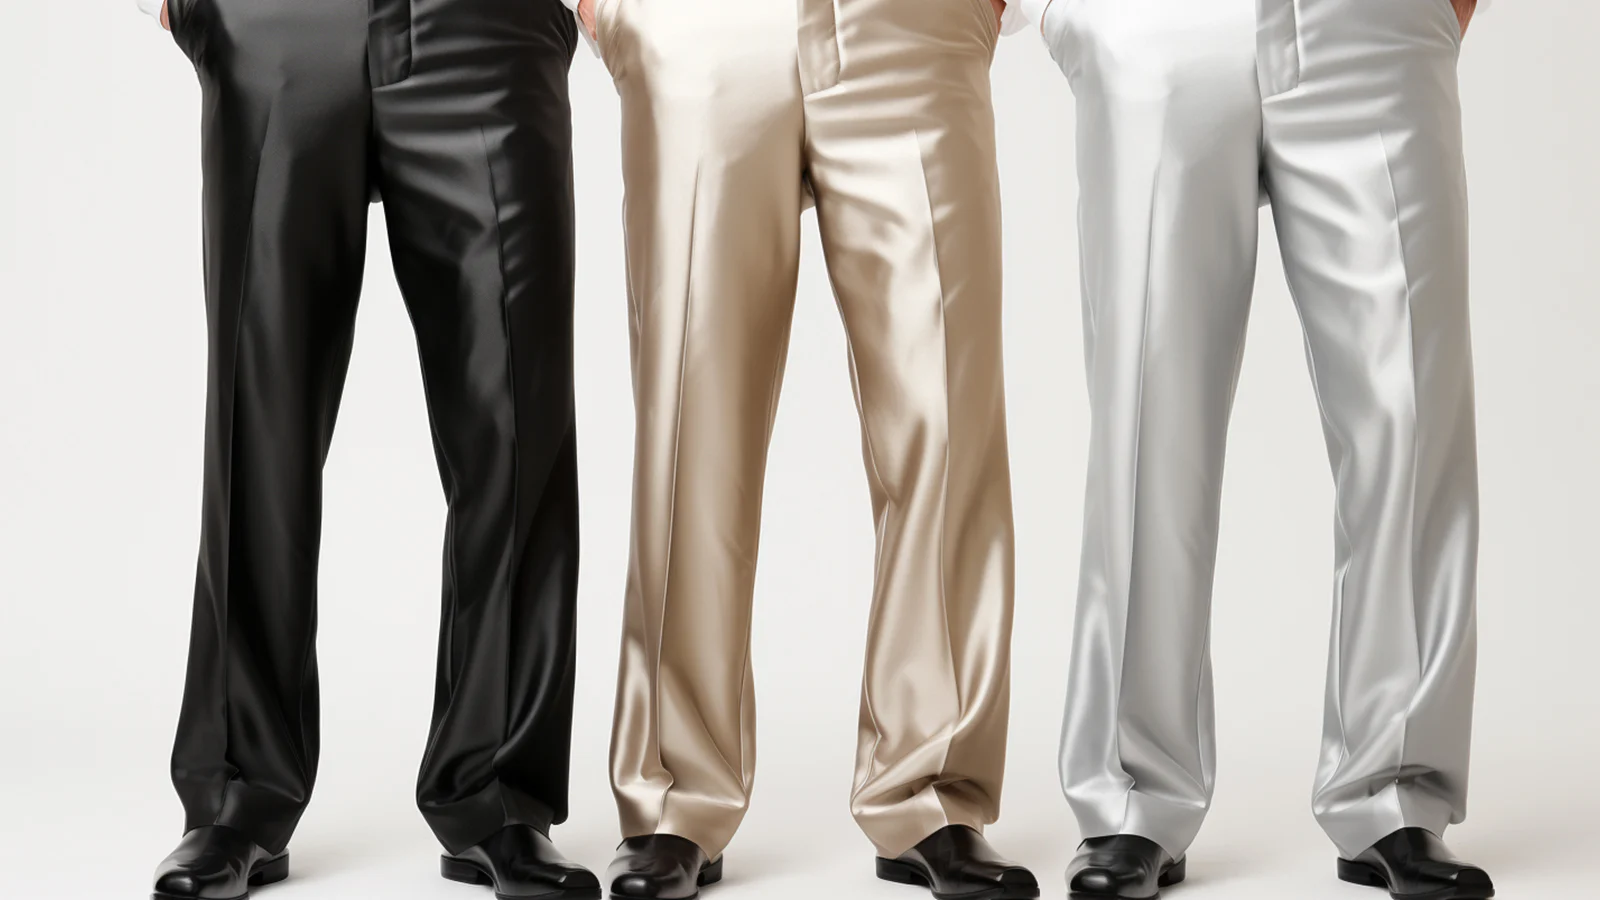 Men's satin Pants in black, silver and gold.